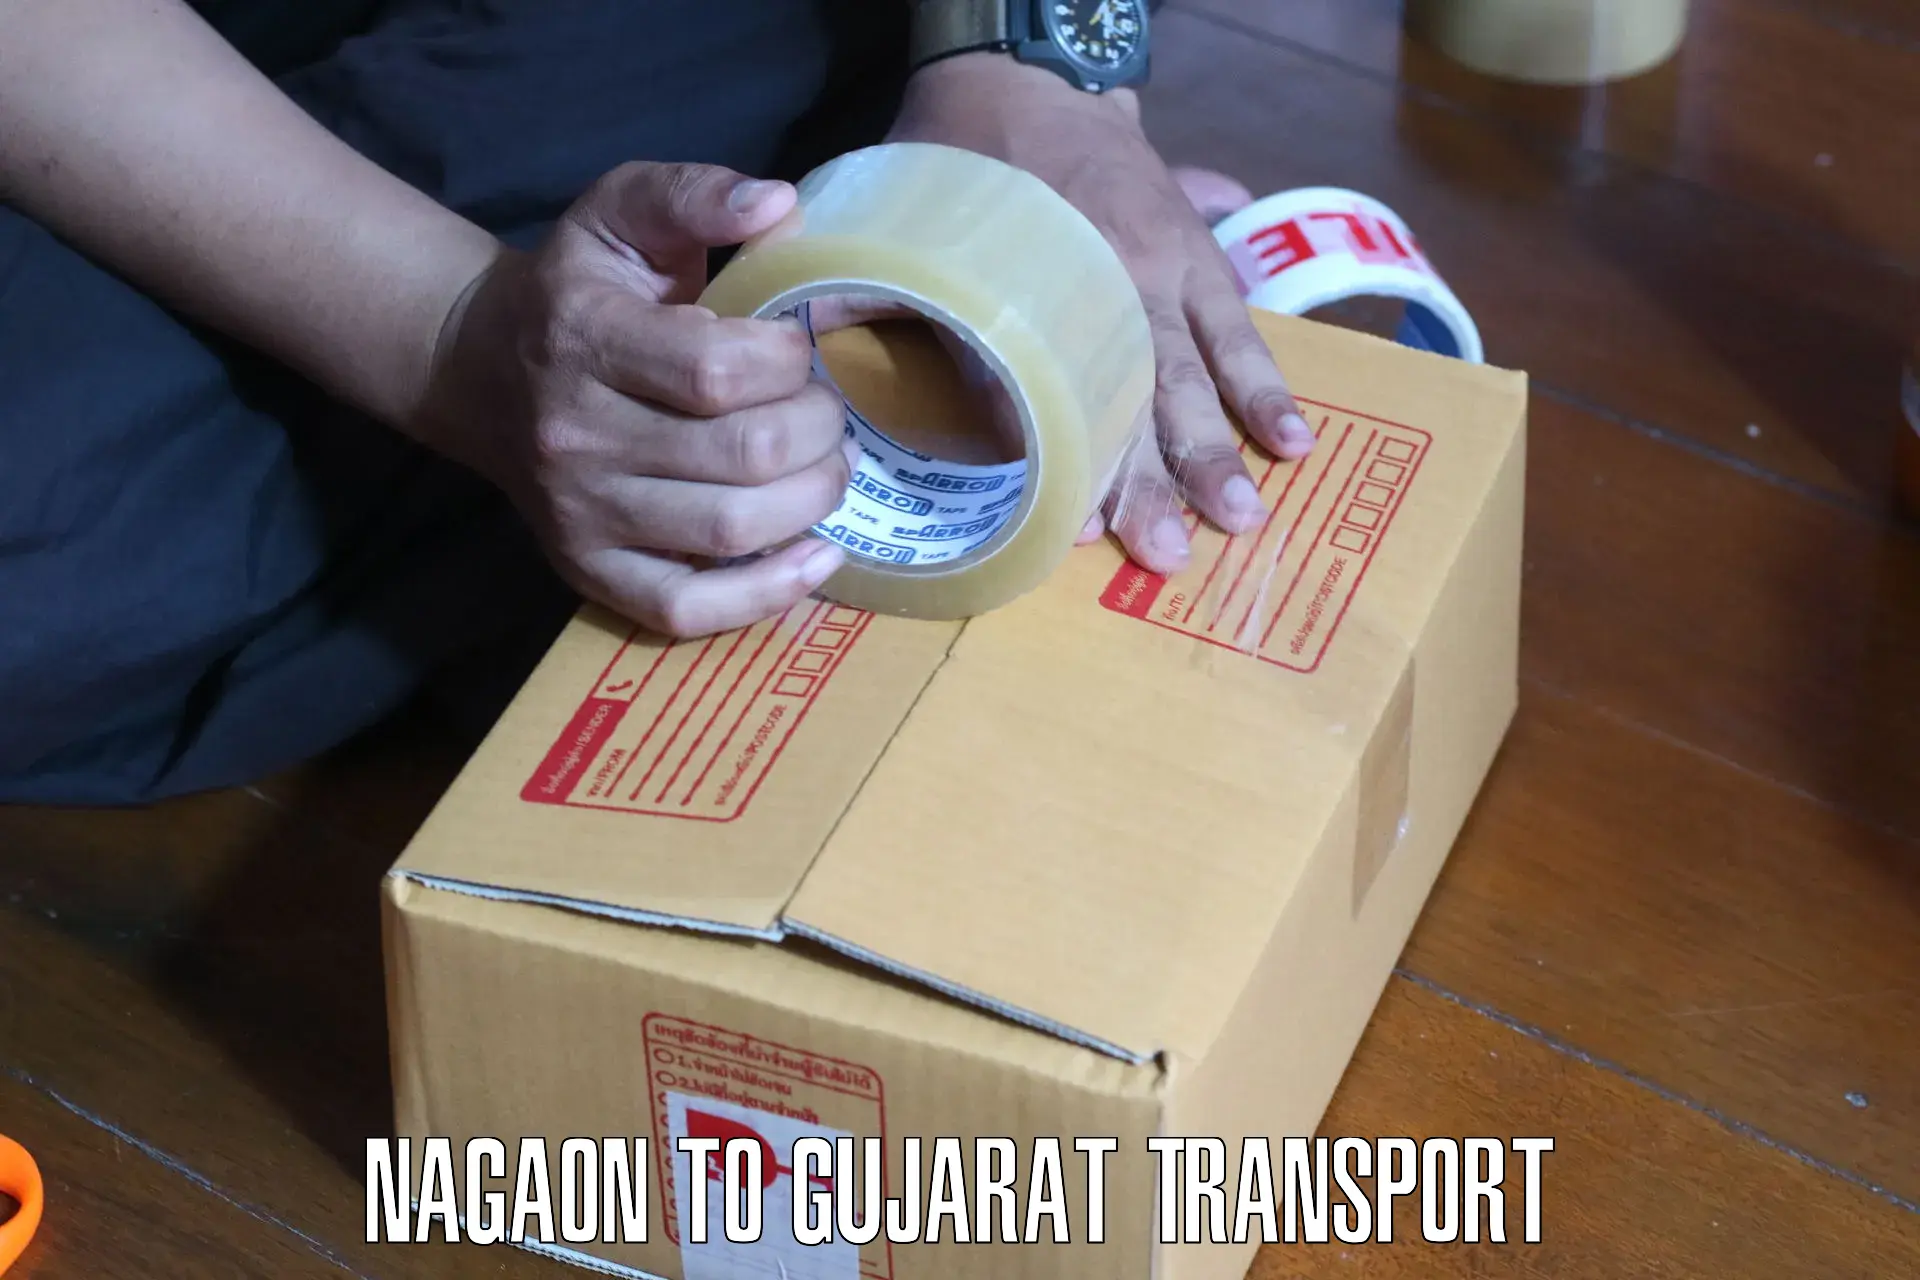 Container transport service Nagaon to Dharmaram